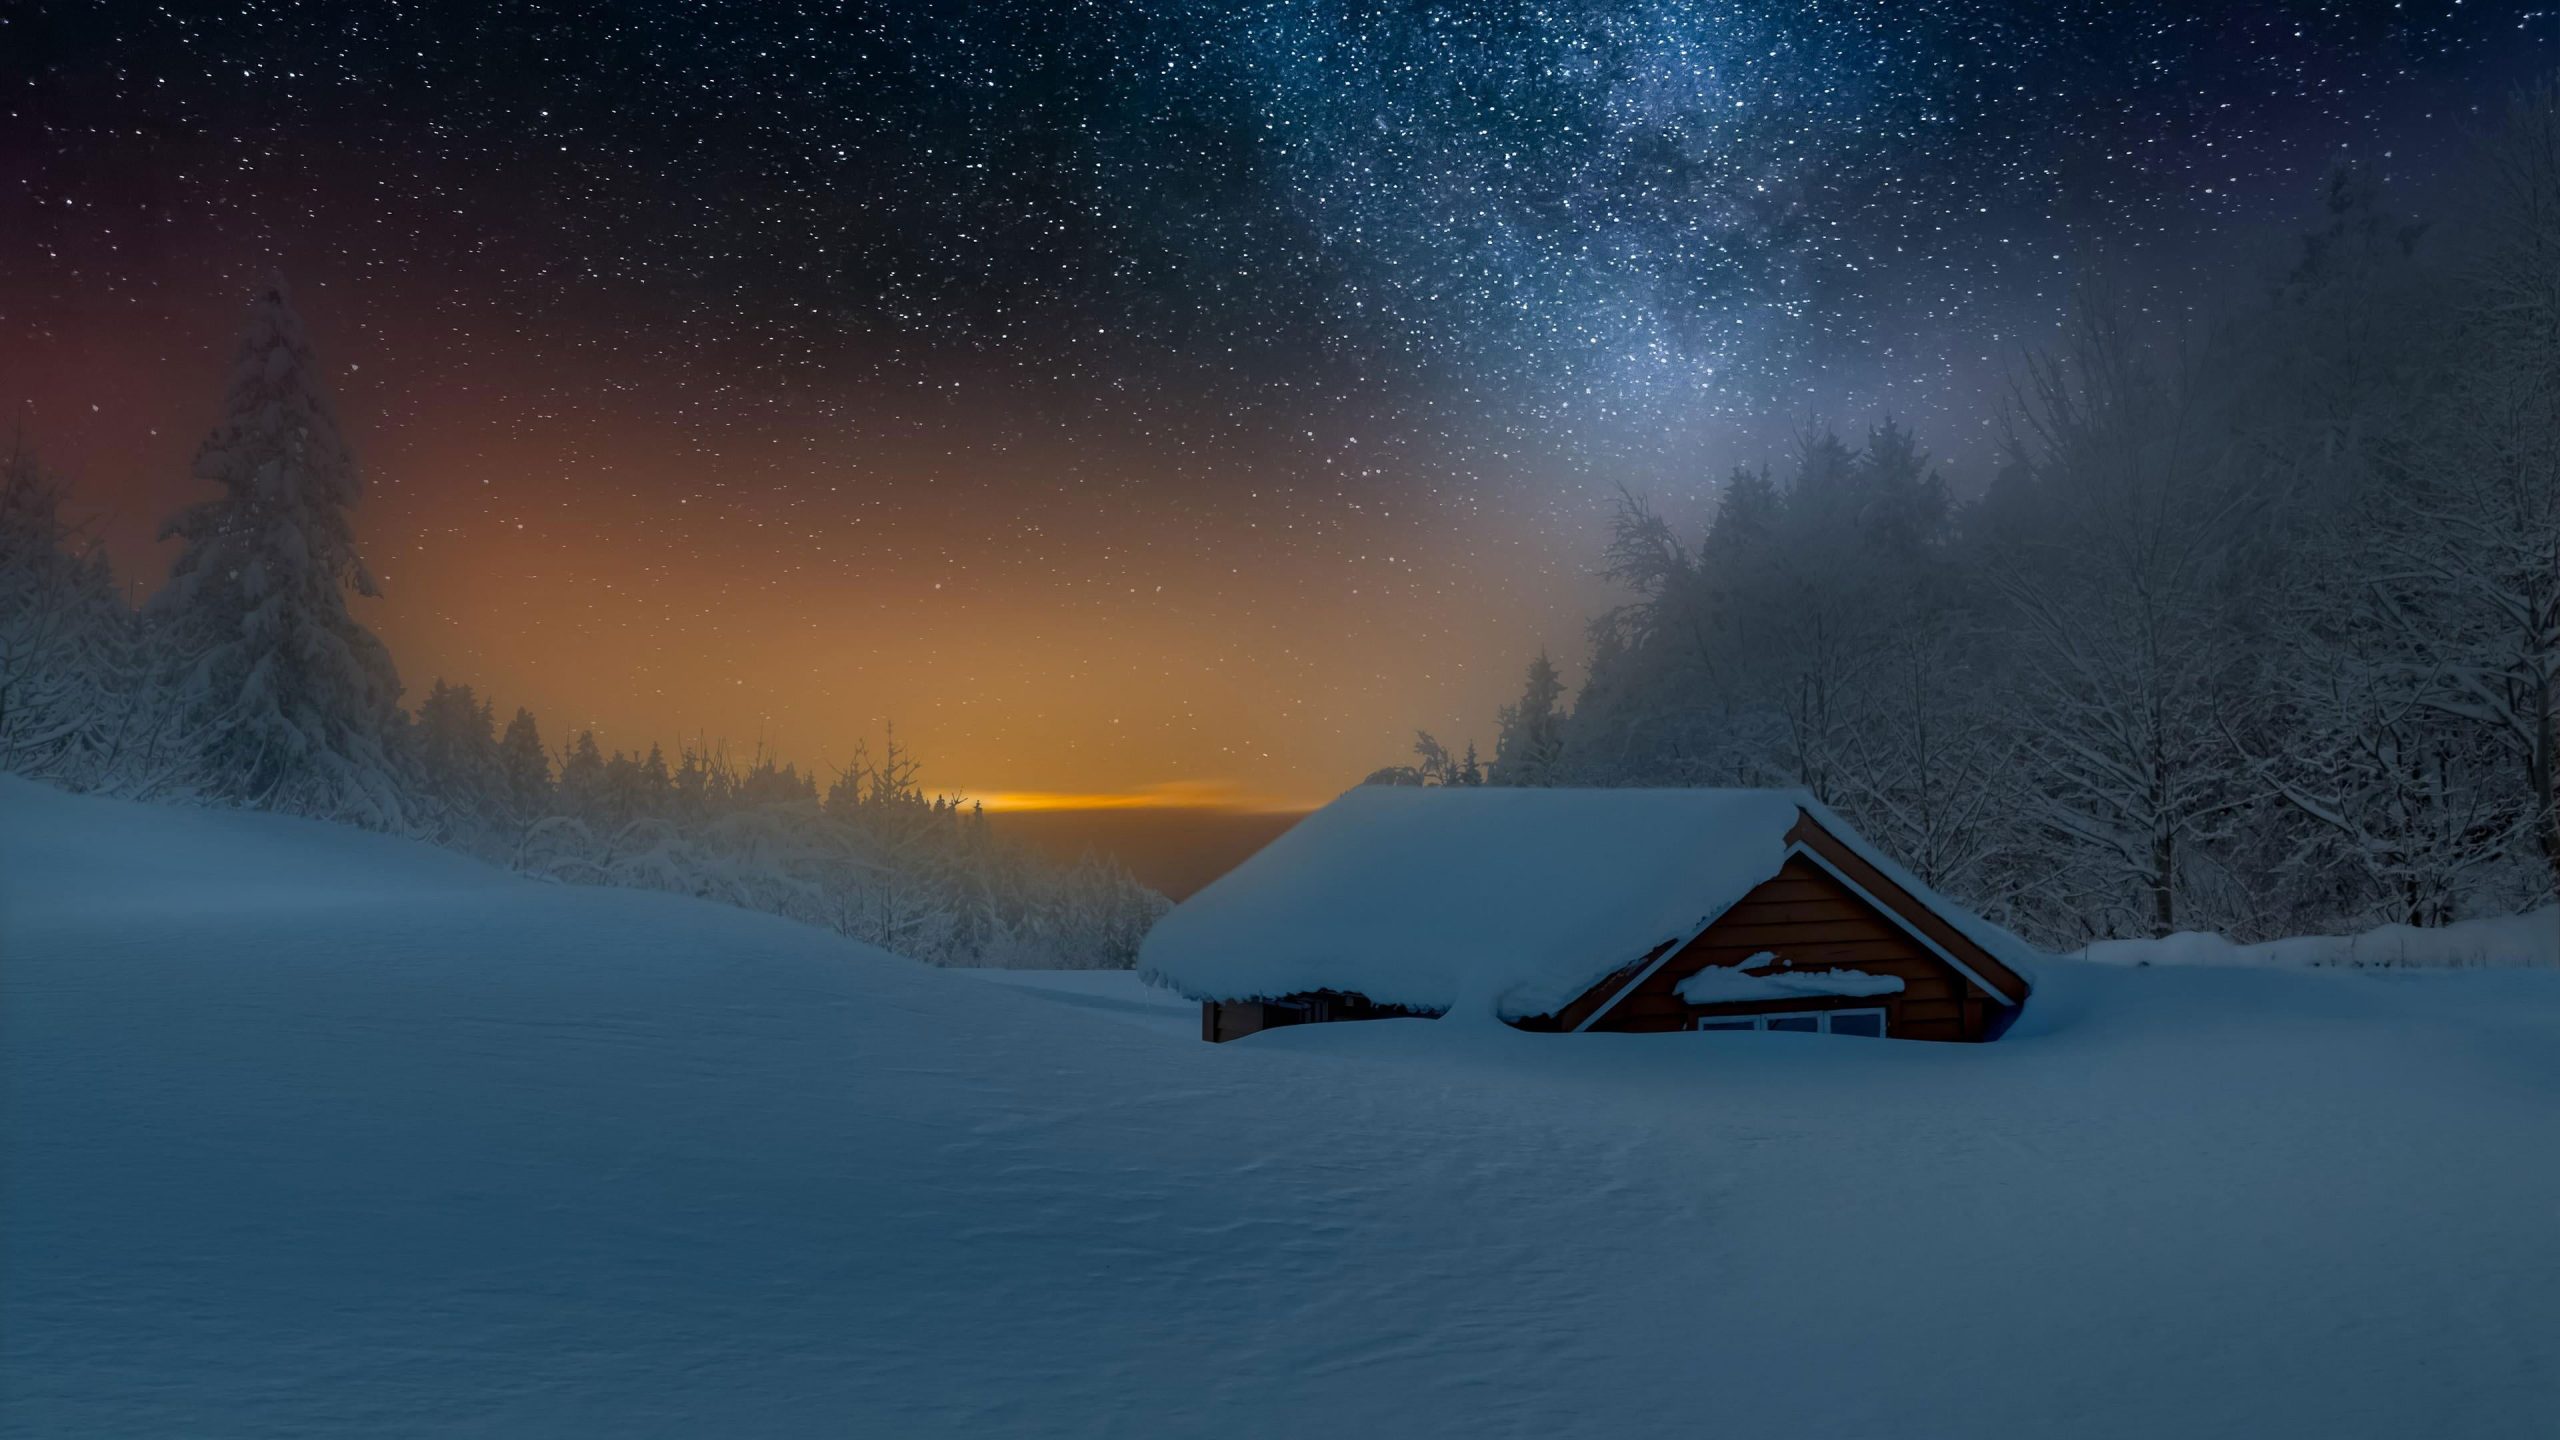 Wallpaper Snowy, Nature, Winter, Freezing, Sky, Starry